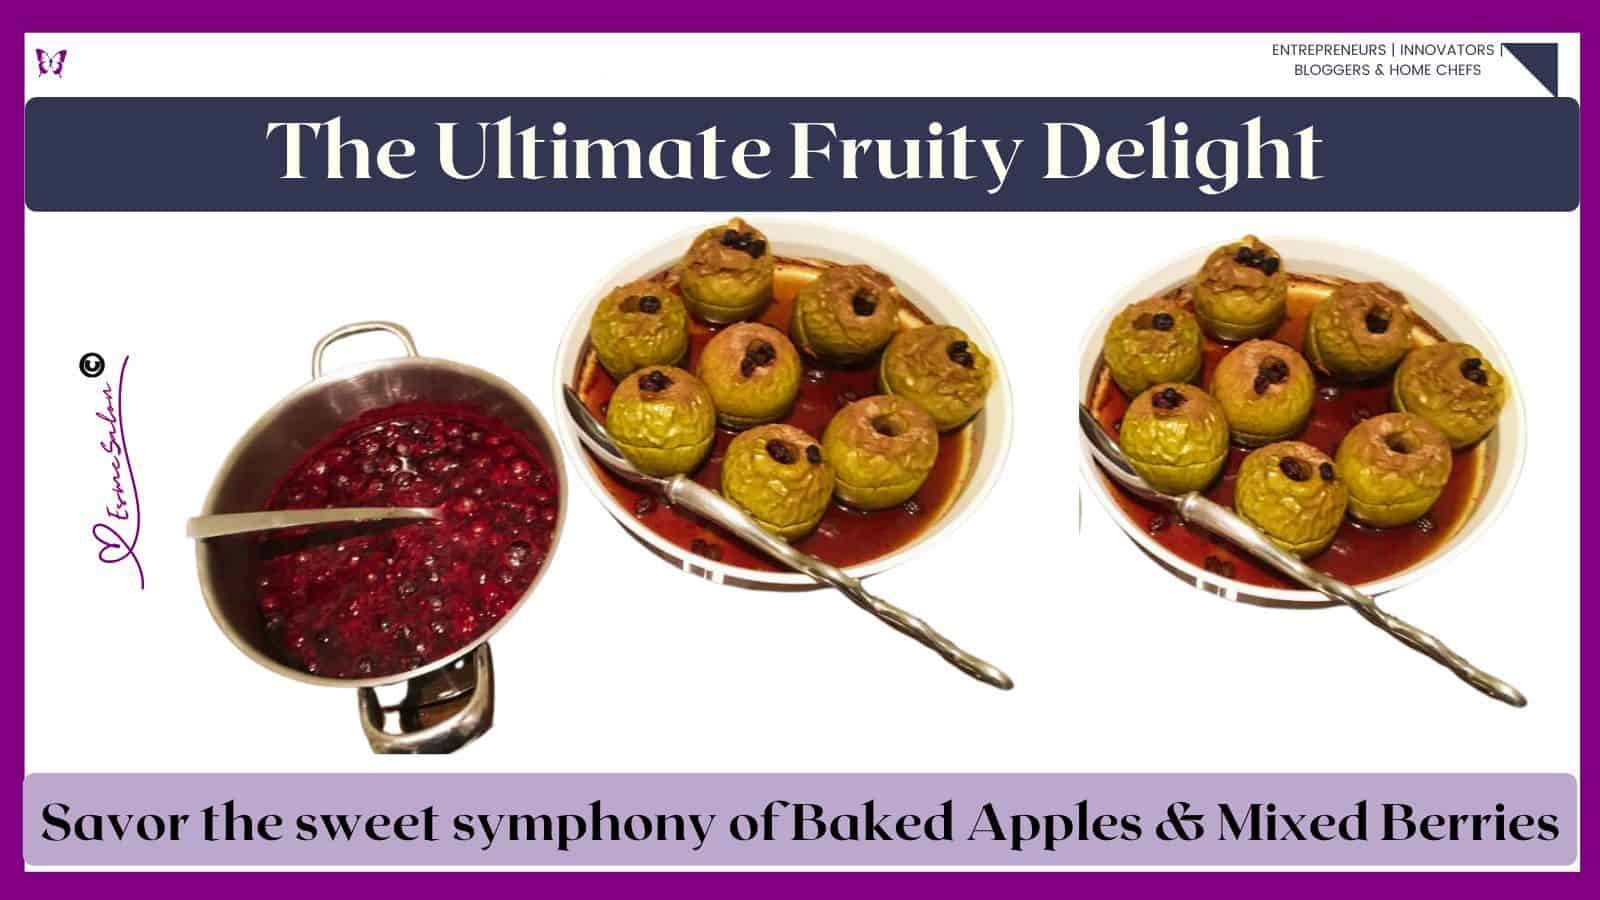 an image of 7 Baked Apples with a bowl of Mixed Berries or the side